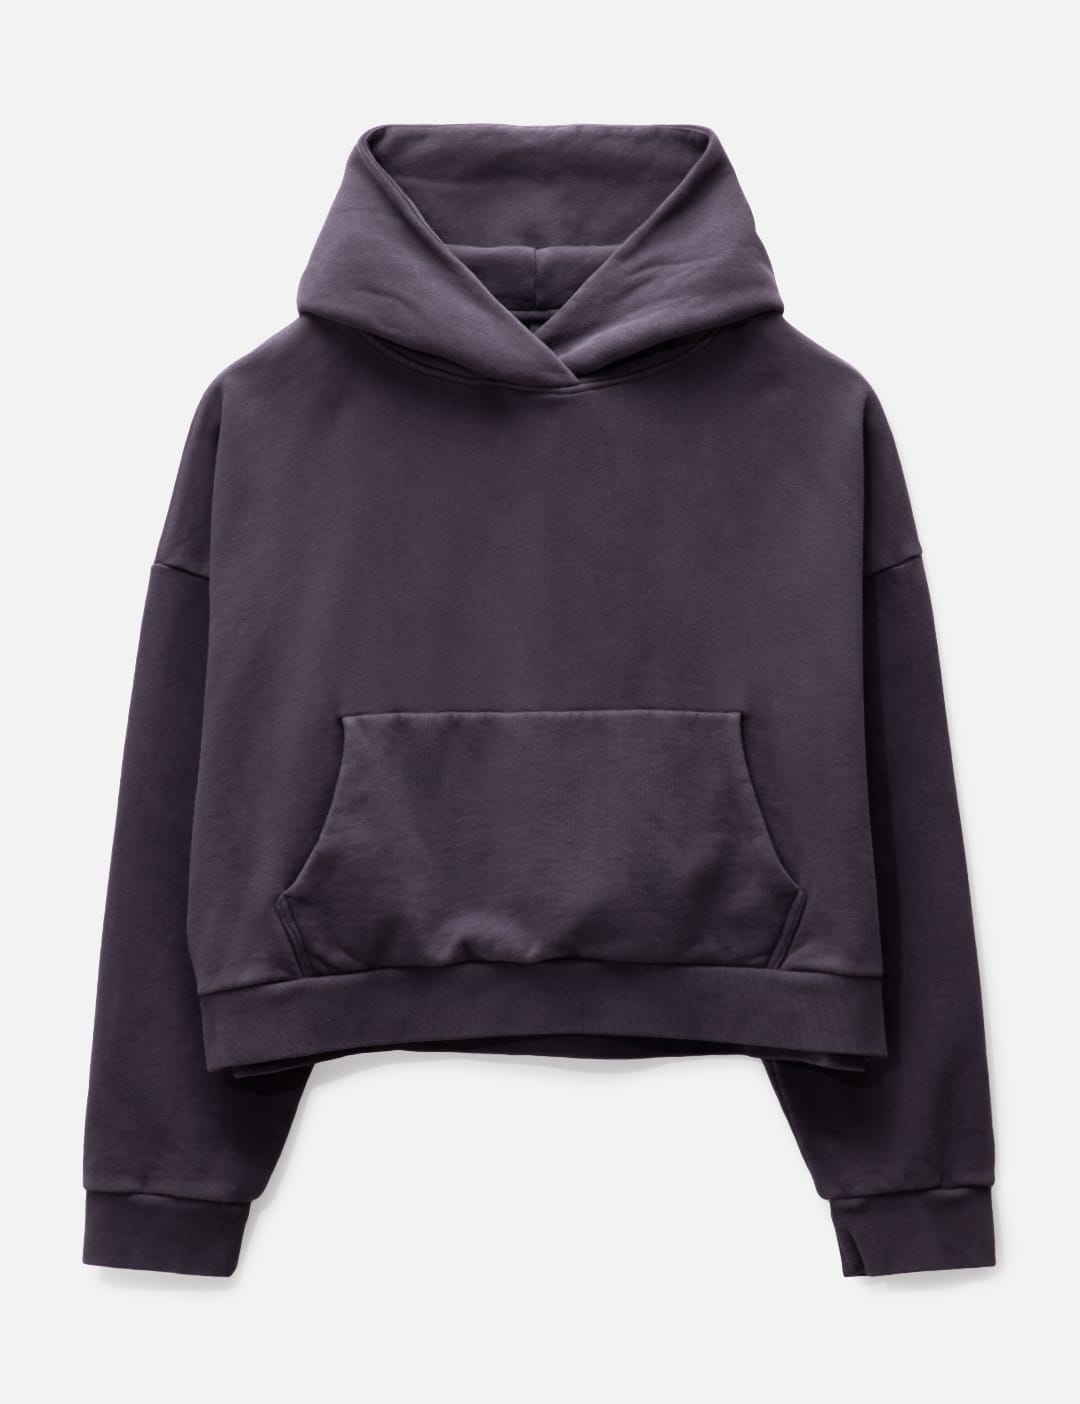 Stüssy - Stock Logo Hoodie | HBX - Globally Curated Fashion and